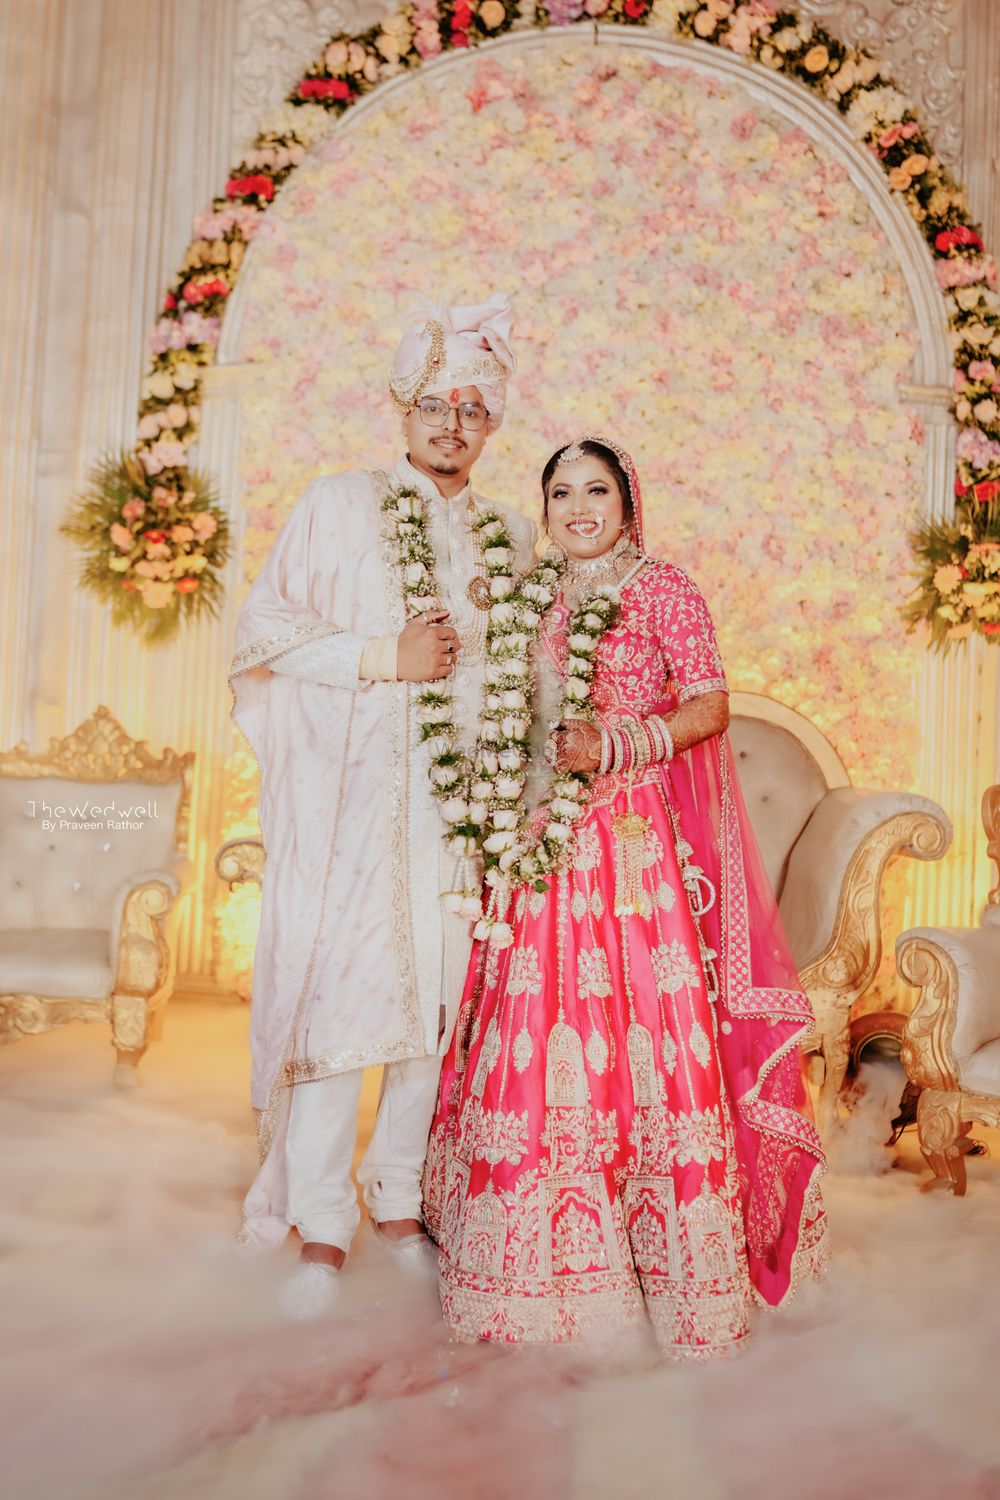 Photo From Shivani & Shubham - By The Wedwell by Praveen Rathore